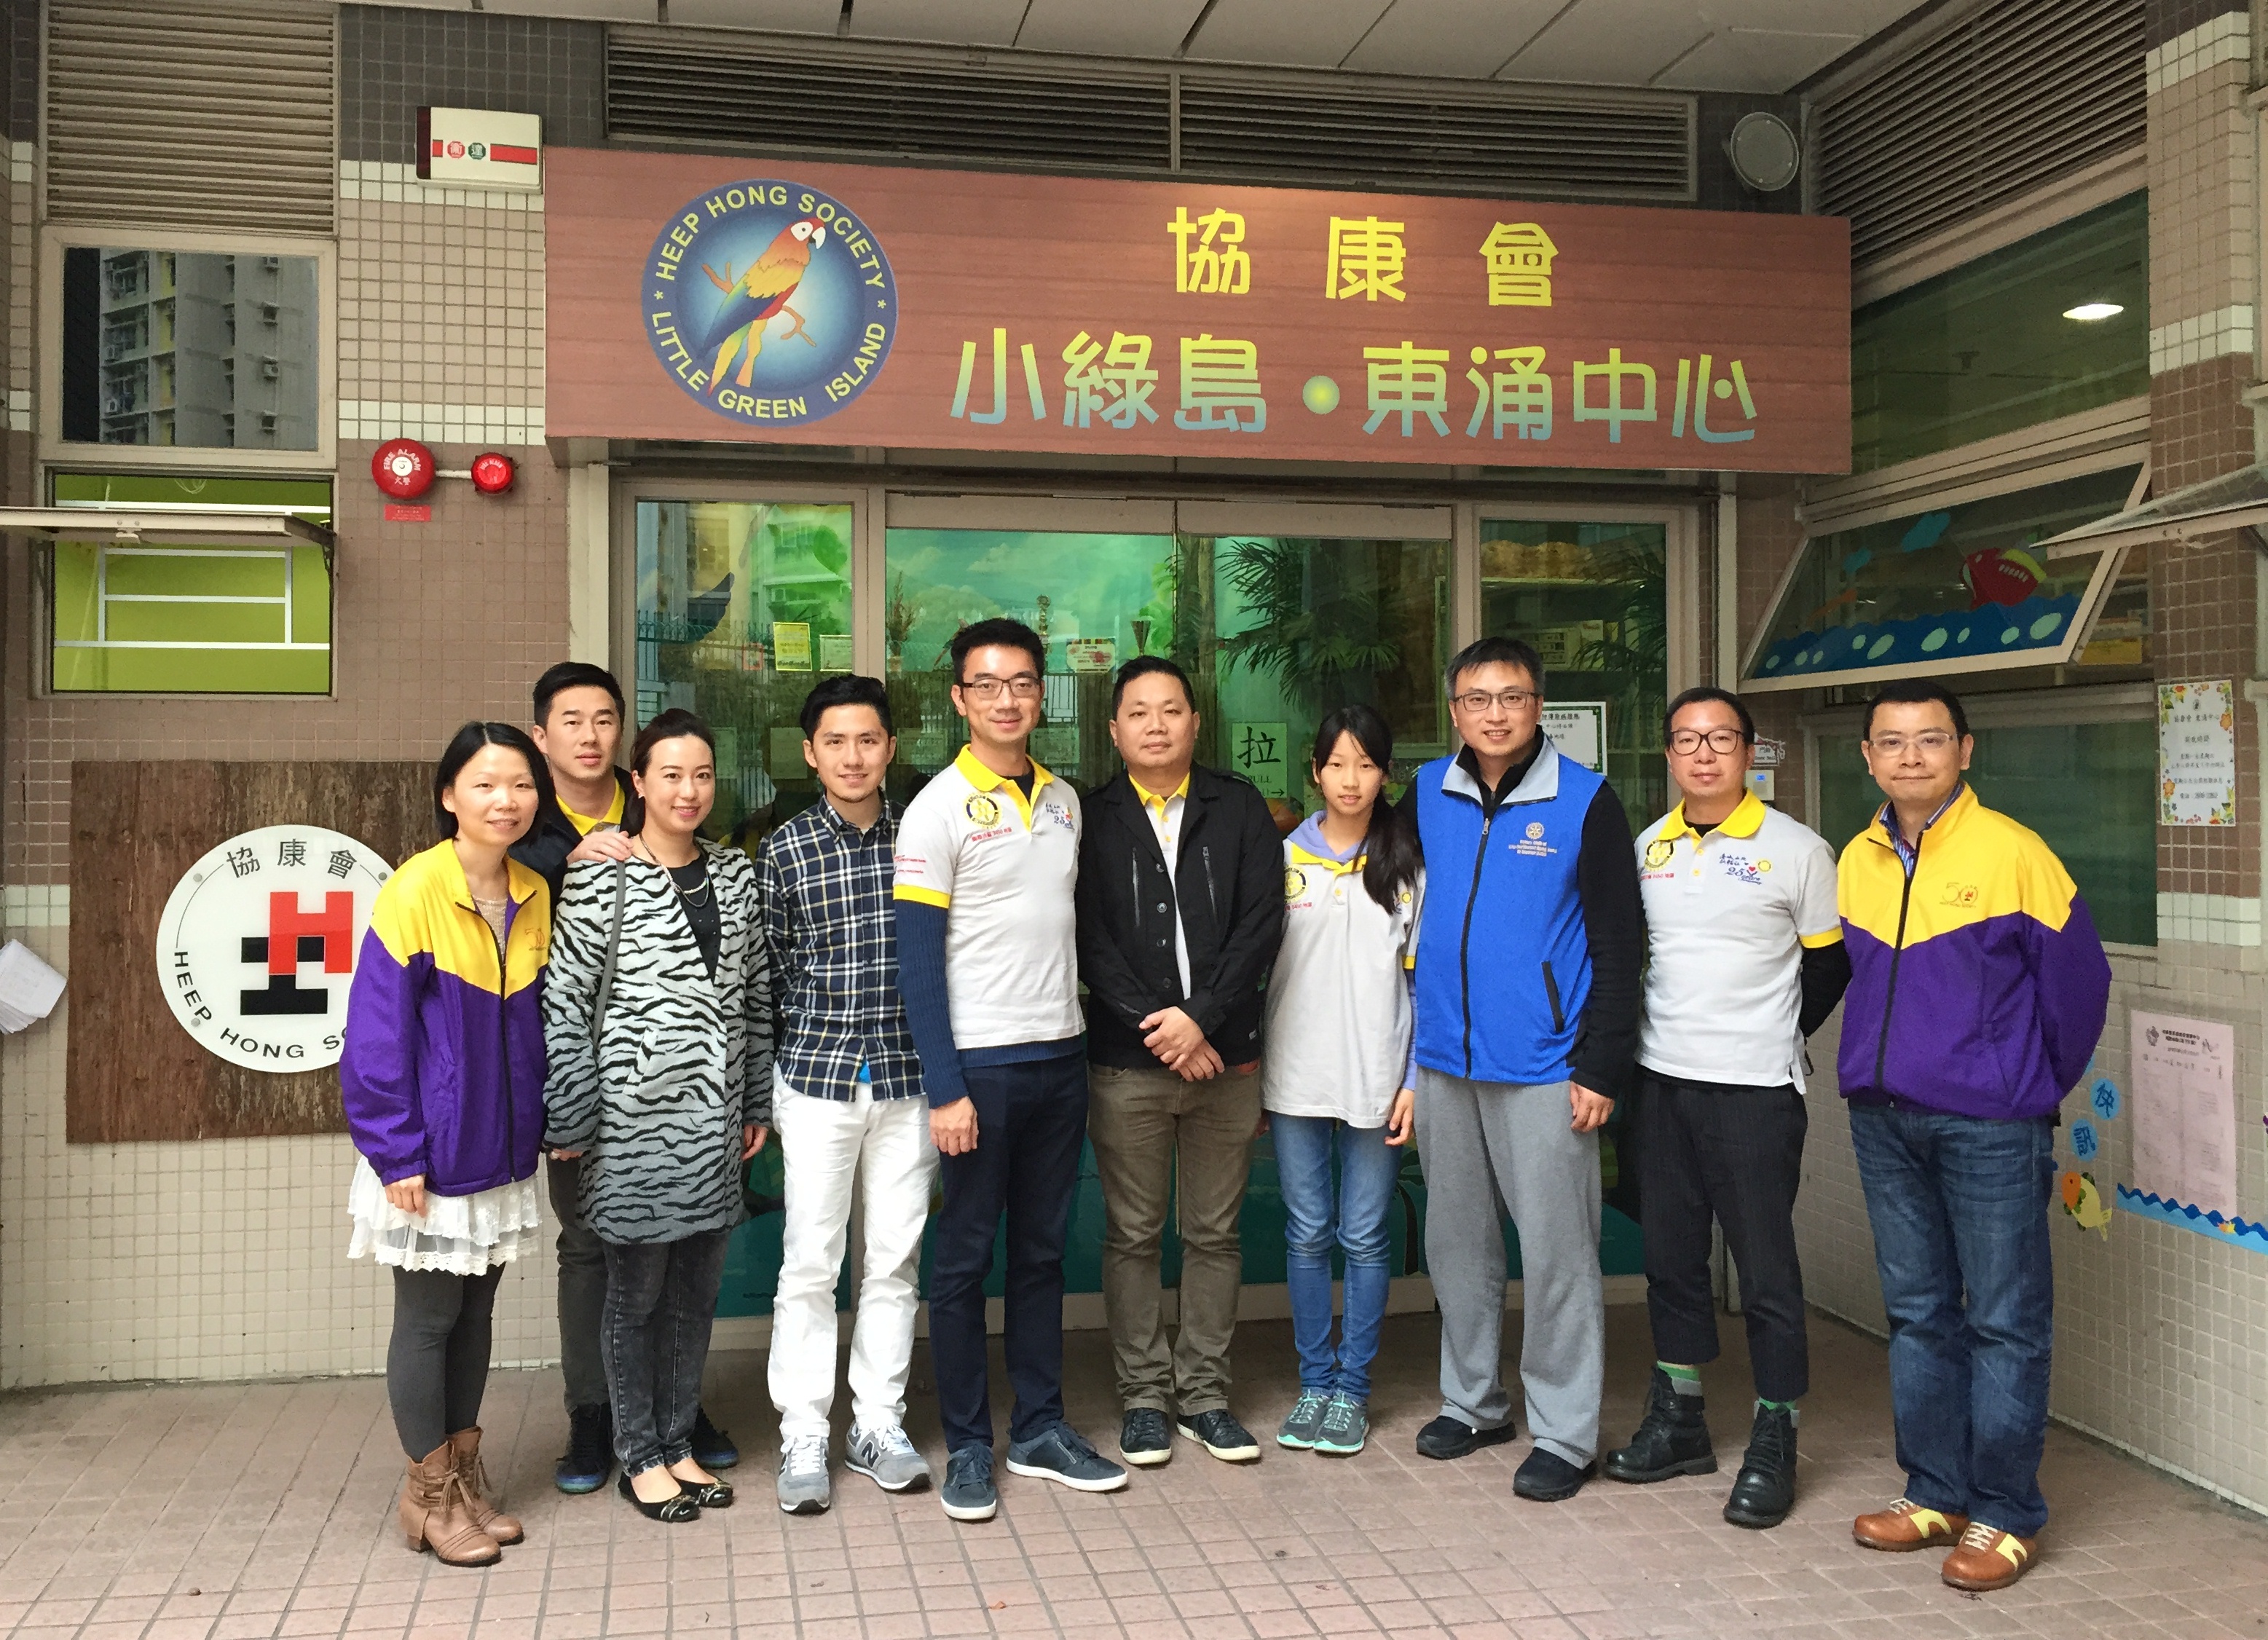 Representatives of Rotary Club of City Northwest visited Tung Chung Centre